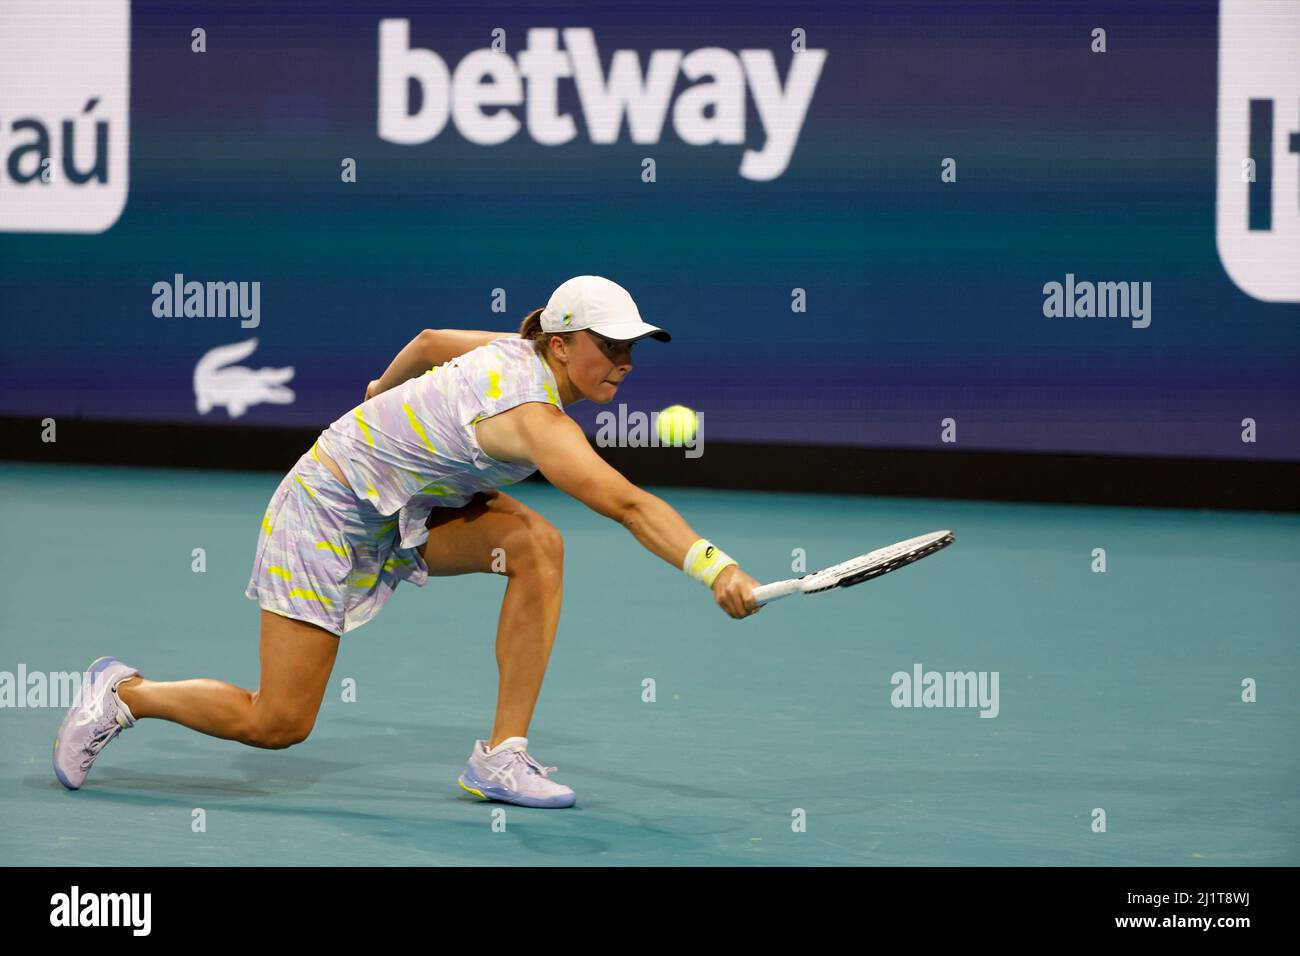 Miami Gardens, Florida, USA. 27th Mar, 2022. Iga Swiatek of Poland defeats Madison Brengle of United States during the 2022 Miami Open presented by Itaú at Hard Rock Stadium on March 27, 2022 in Miami Gardens, Florida People: Iga Swiatek Credit: Hoo Me/Media Punch/Alamy Live News Stock Photo